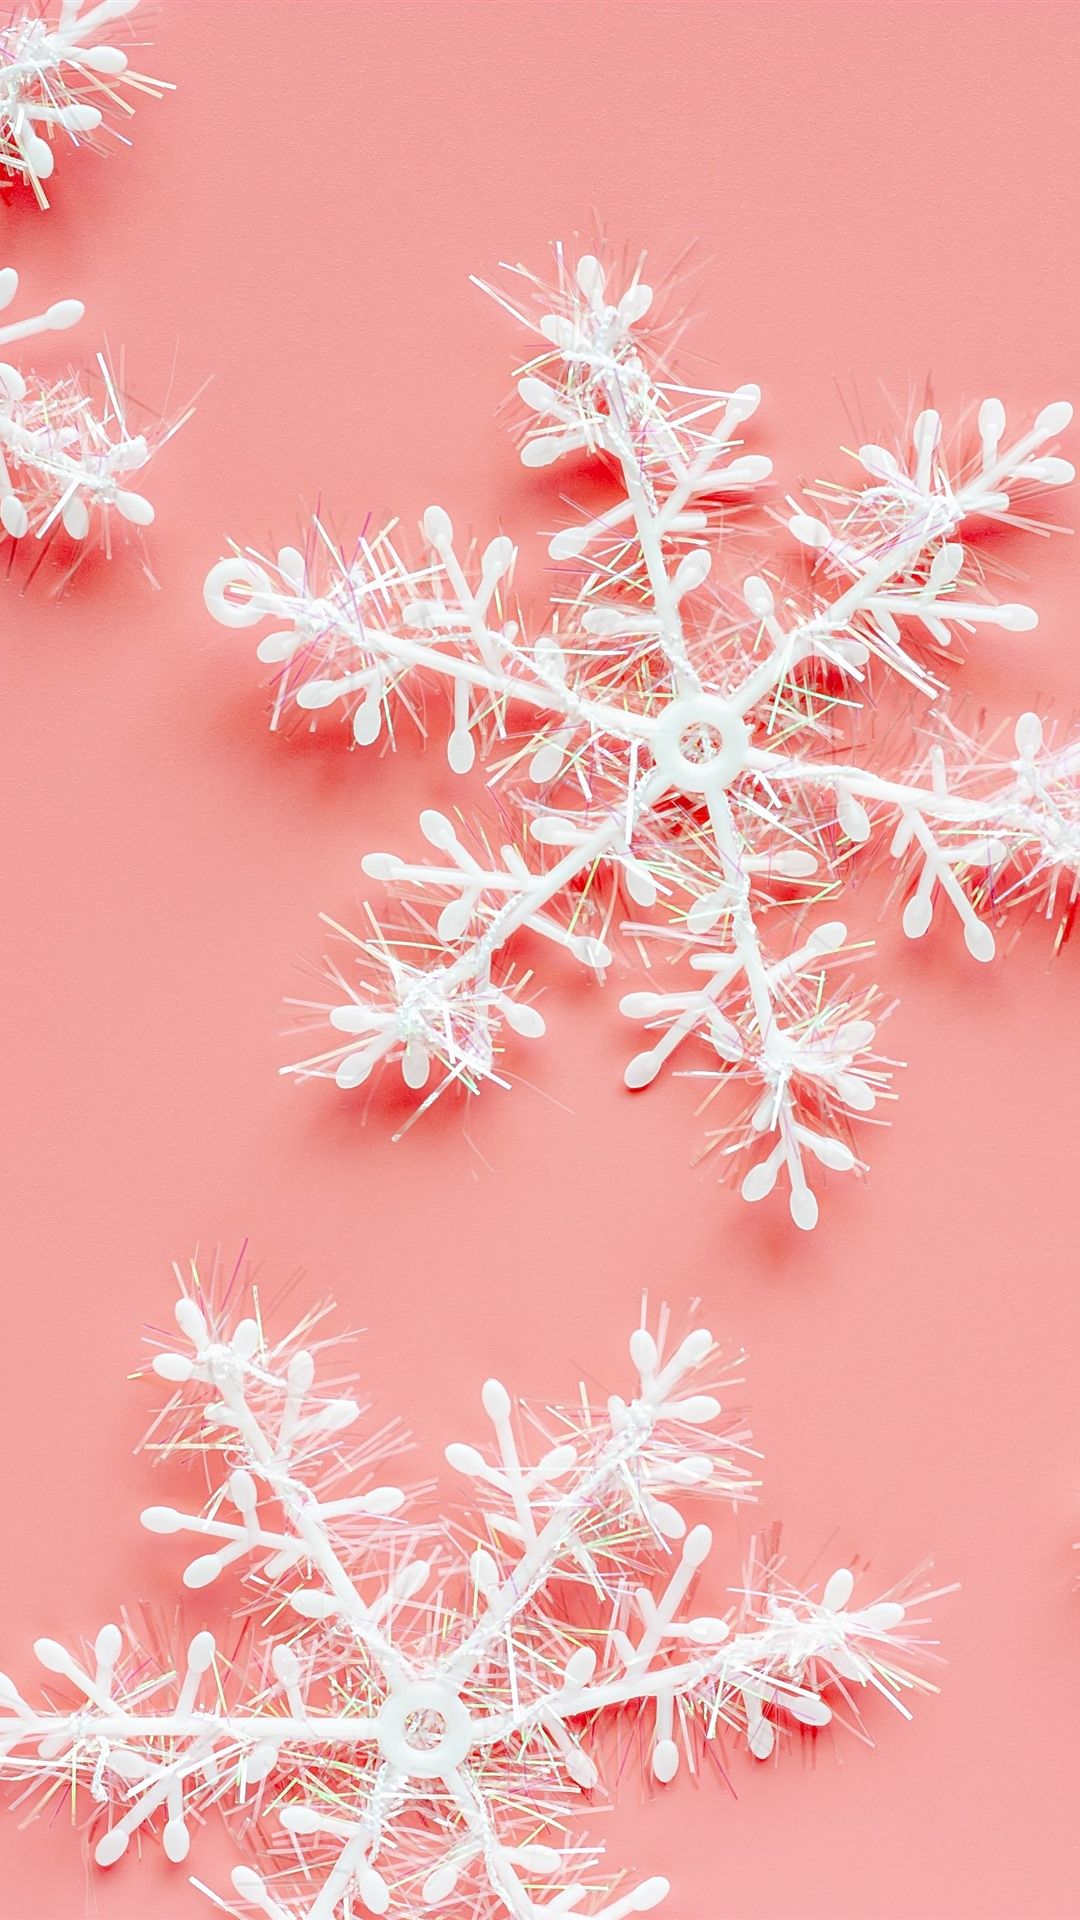 Snowflakes, Pink Background, Decoration 1242x2688 IPhone 11 Pro XS Max Wallpaper, Background, Picture, Image